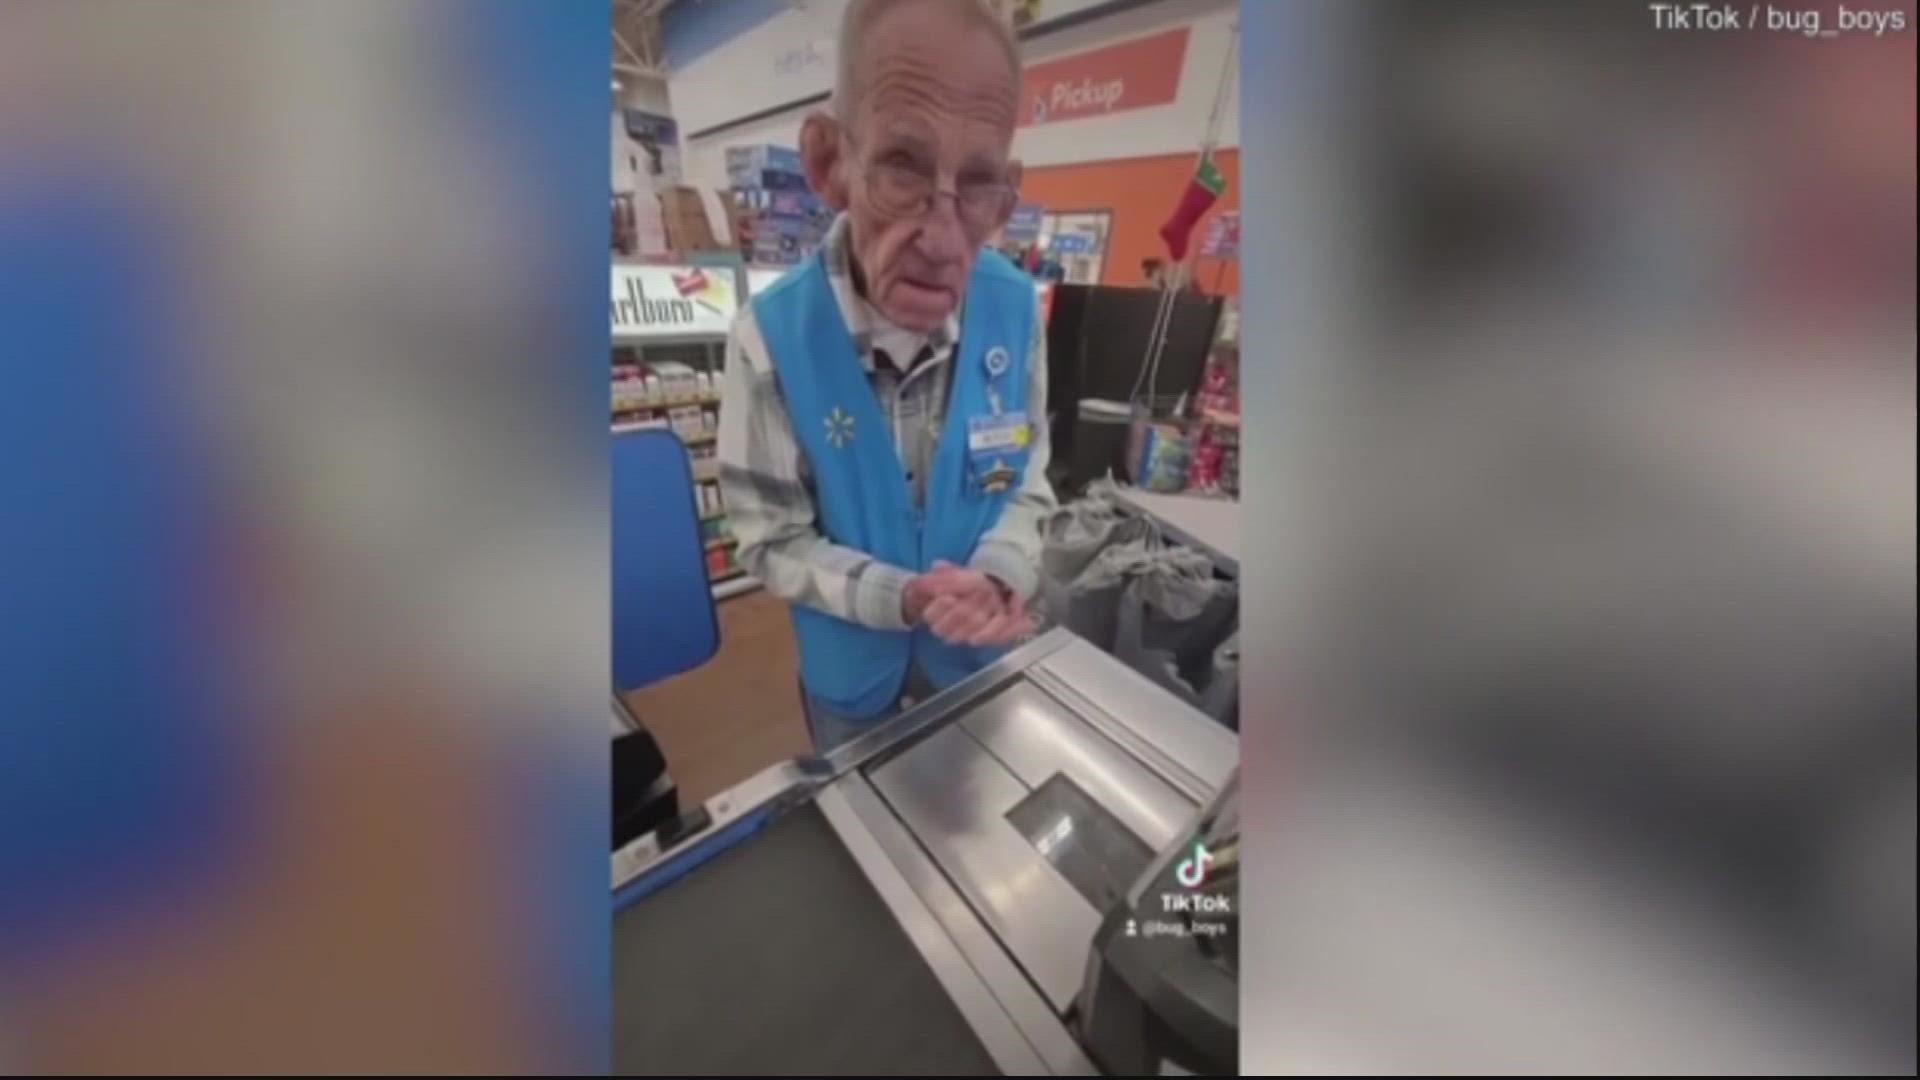 An 82-year-old Walmart cashier in La Vale, Maryland can finally retire because of the kindness of strangers.